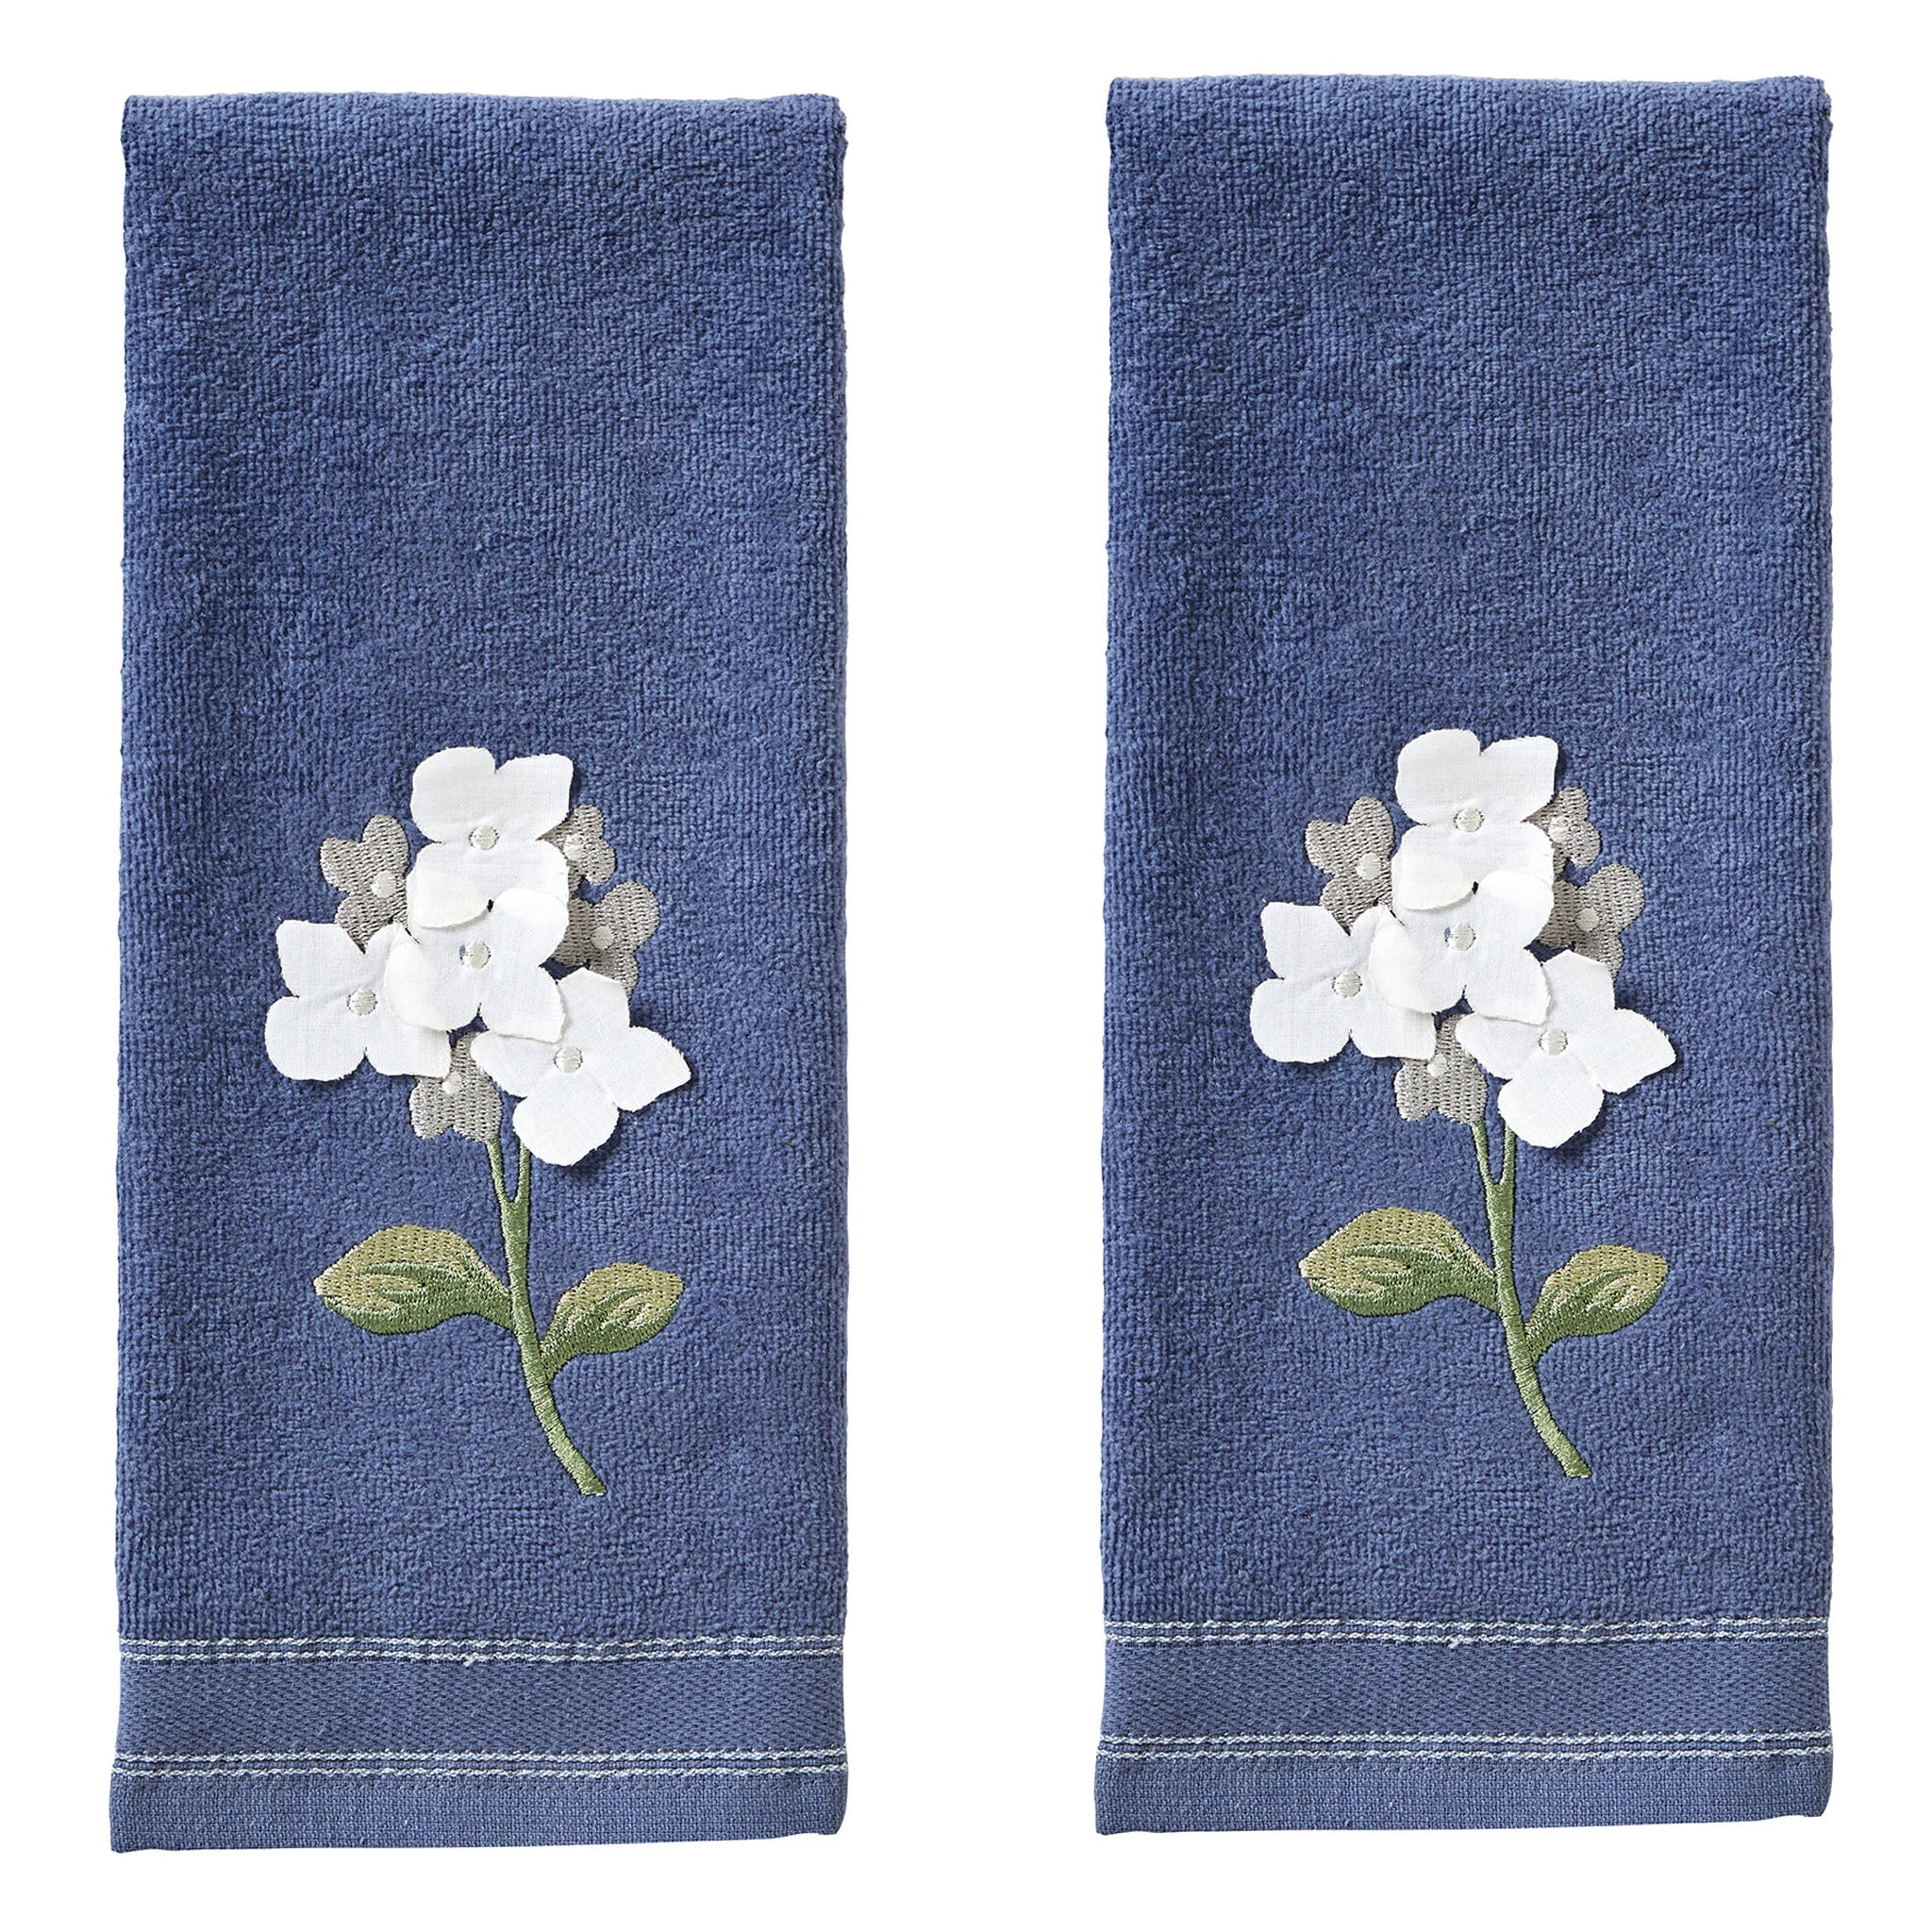 Barn Home Bath Collection - Set of 2 Hand Towels